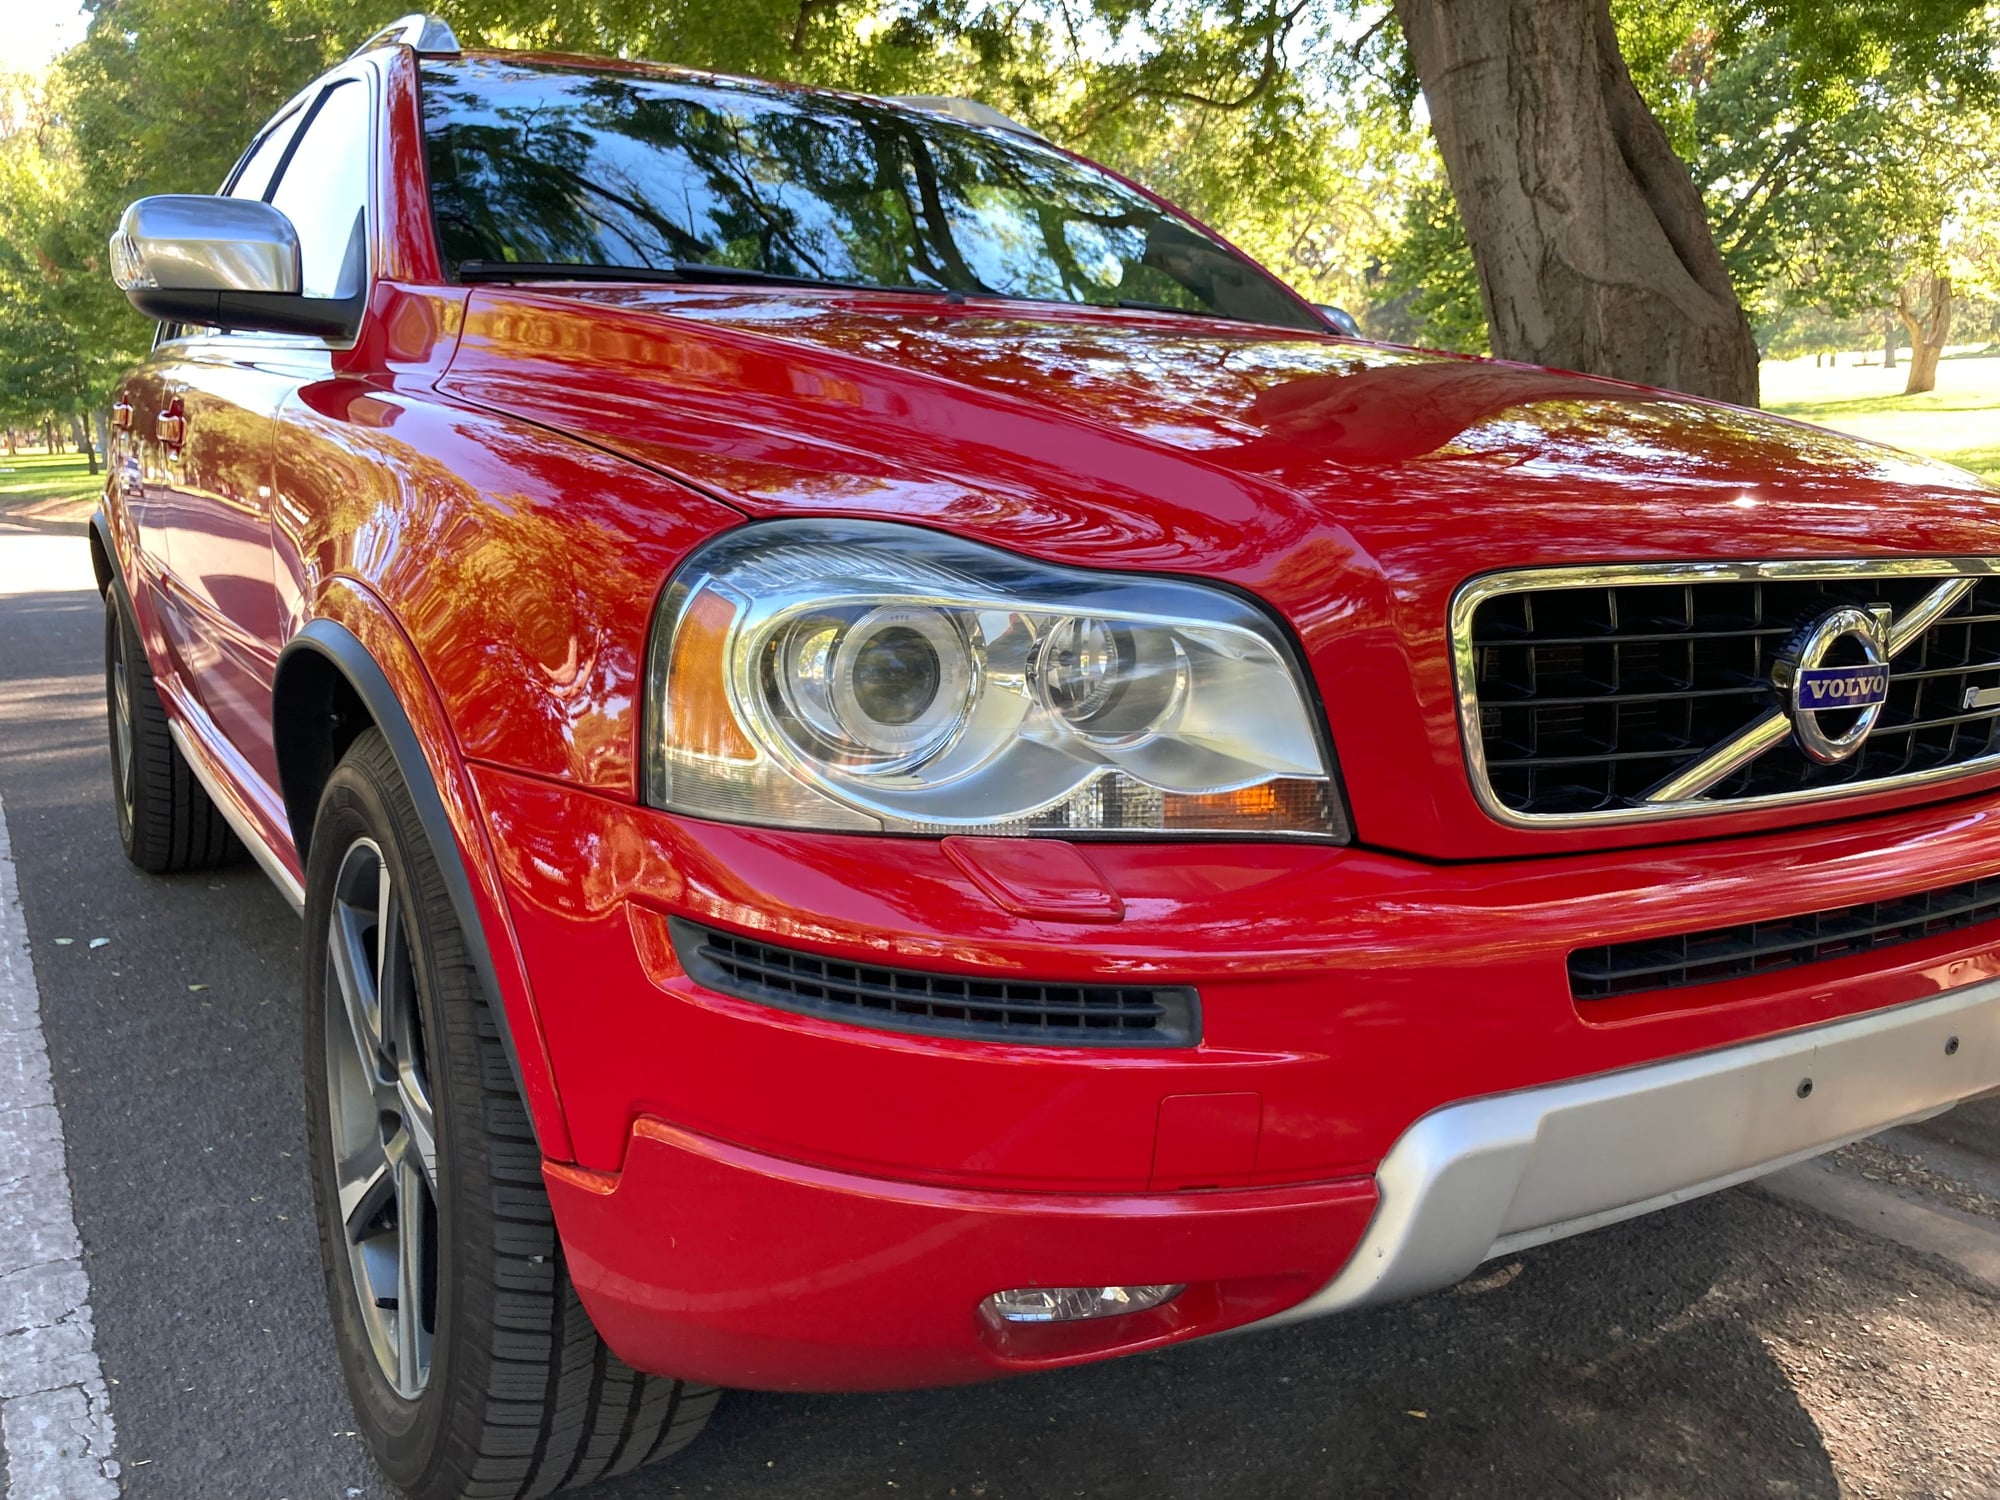 2013 Volvo XC90 - 2013 Volvo XC90 R-Design Red - Used - VIN YV4952CF2D1650675 - 154,000 Miles - 6 cyl - 2WD - Automatic - SUV - Red - Sacramento, CA 95832, United States